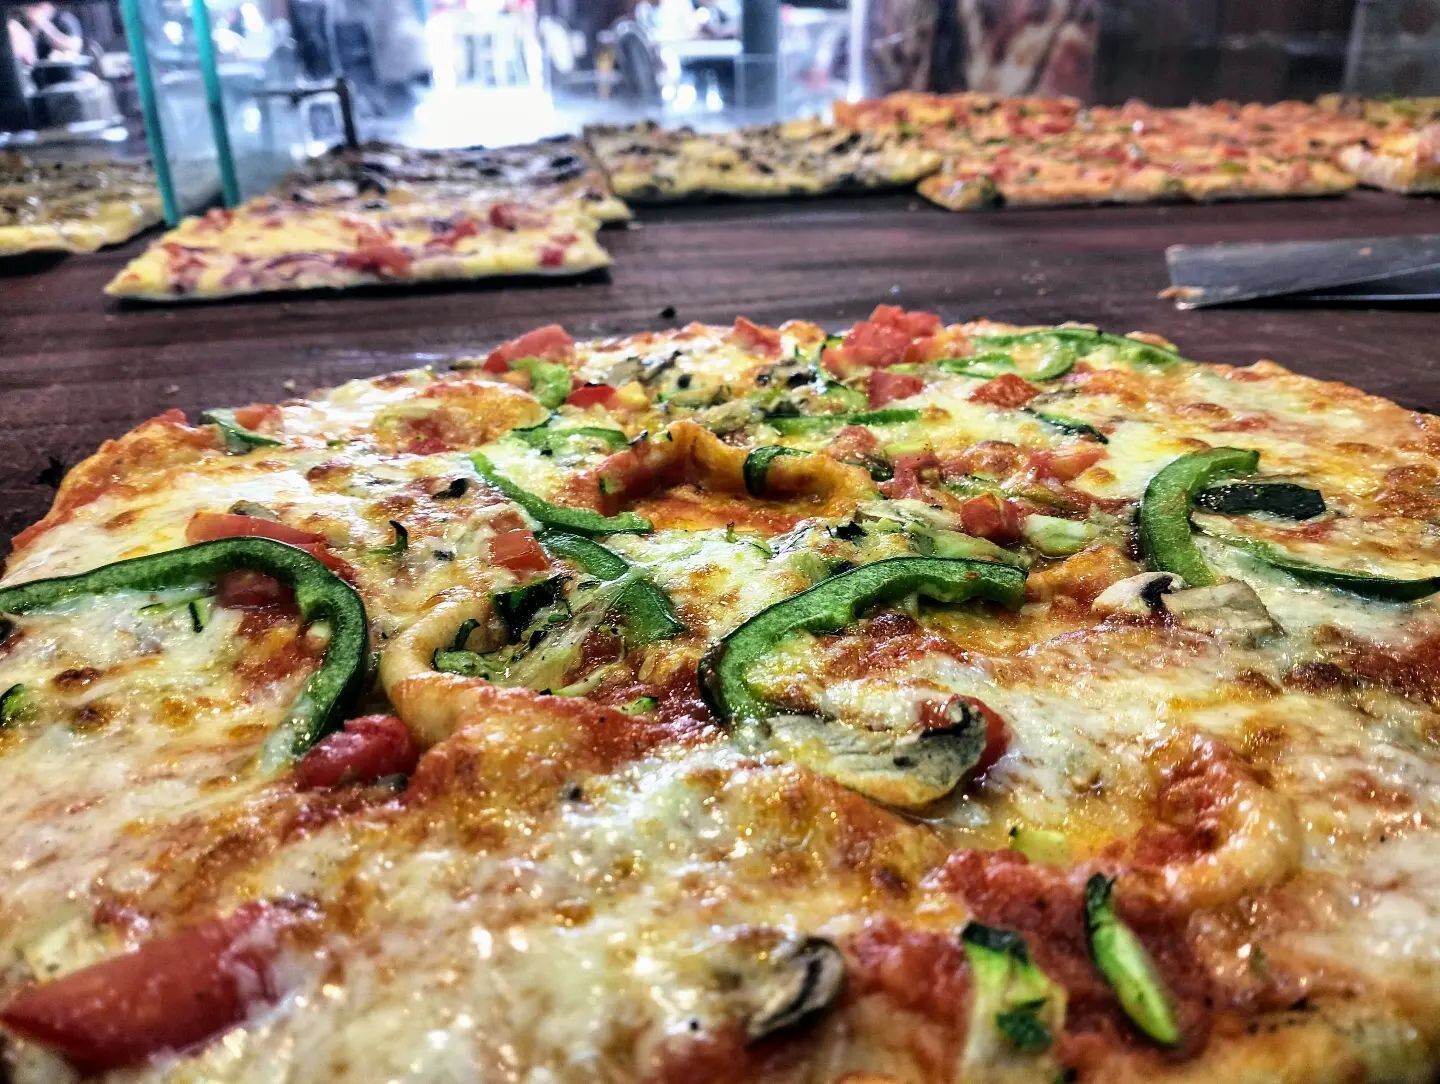 Are you looking for authentic Italian pizza? Then look no further. Come to Pomodoro and enjoy authentic Italian pizza in the heart of Nairobi, making you feel as if you are in Rome.